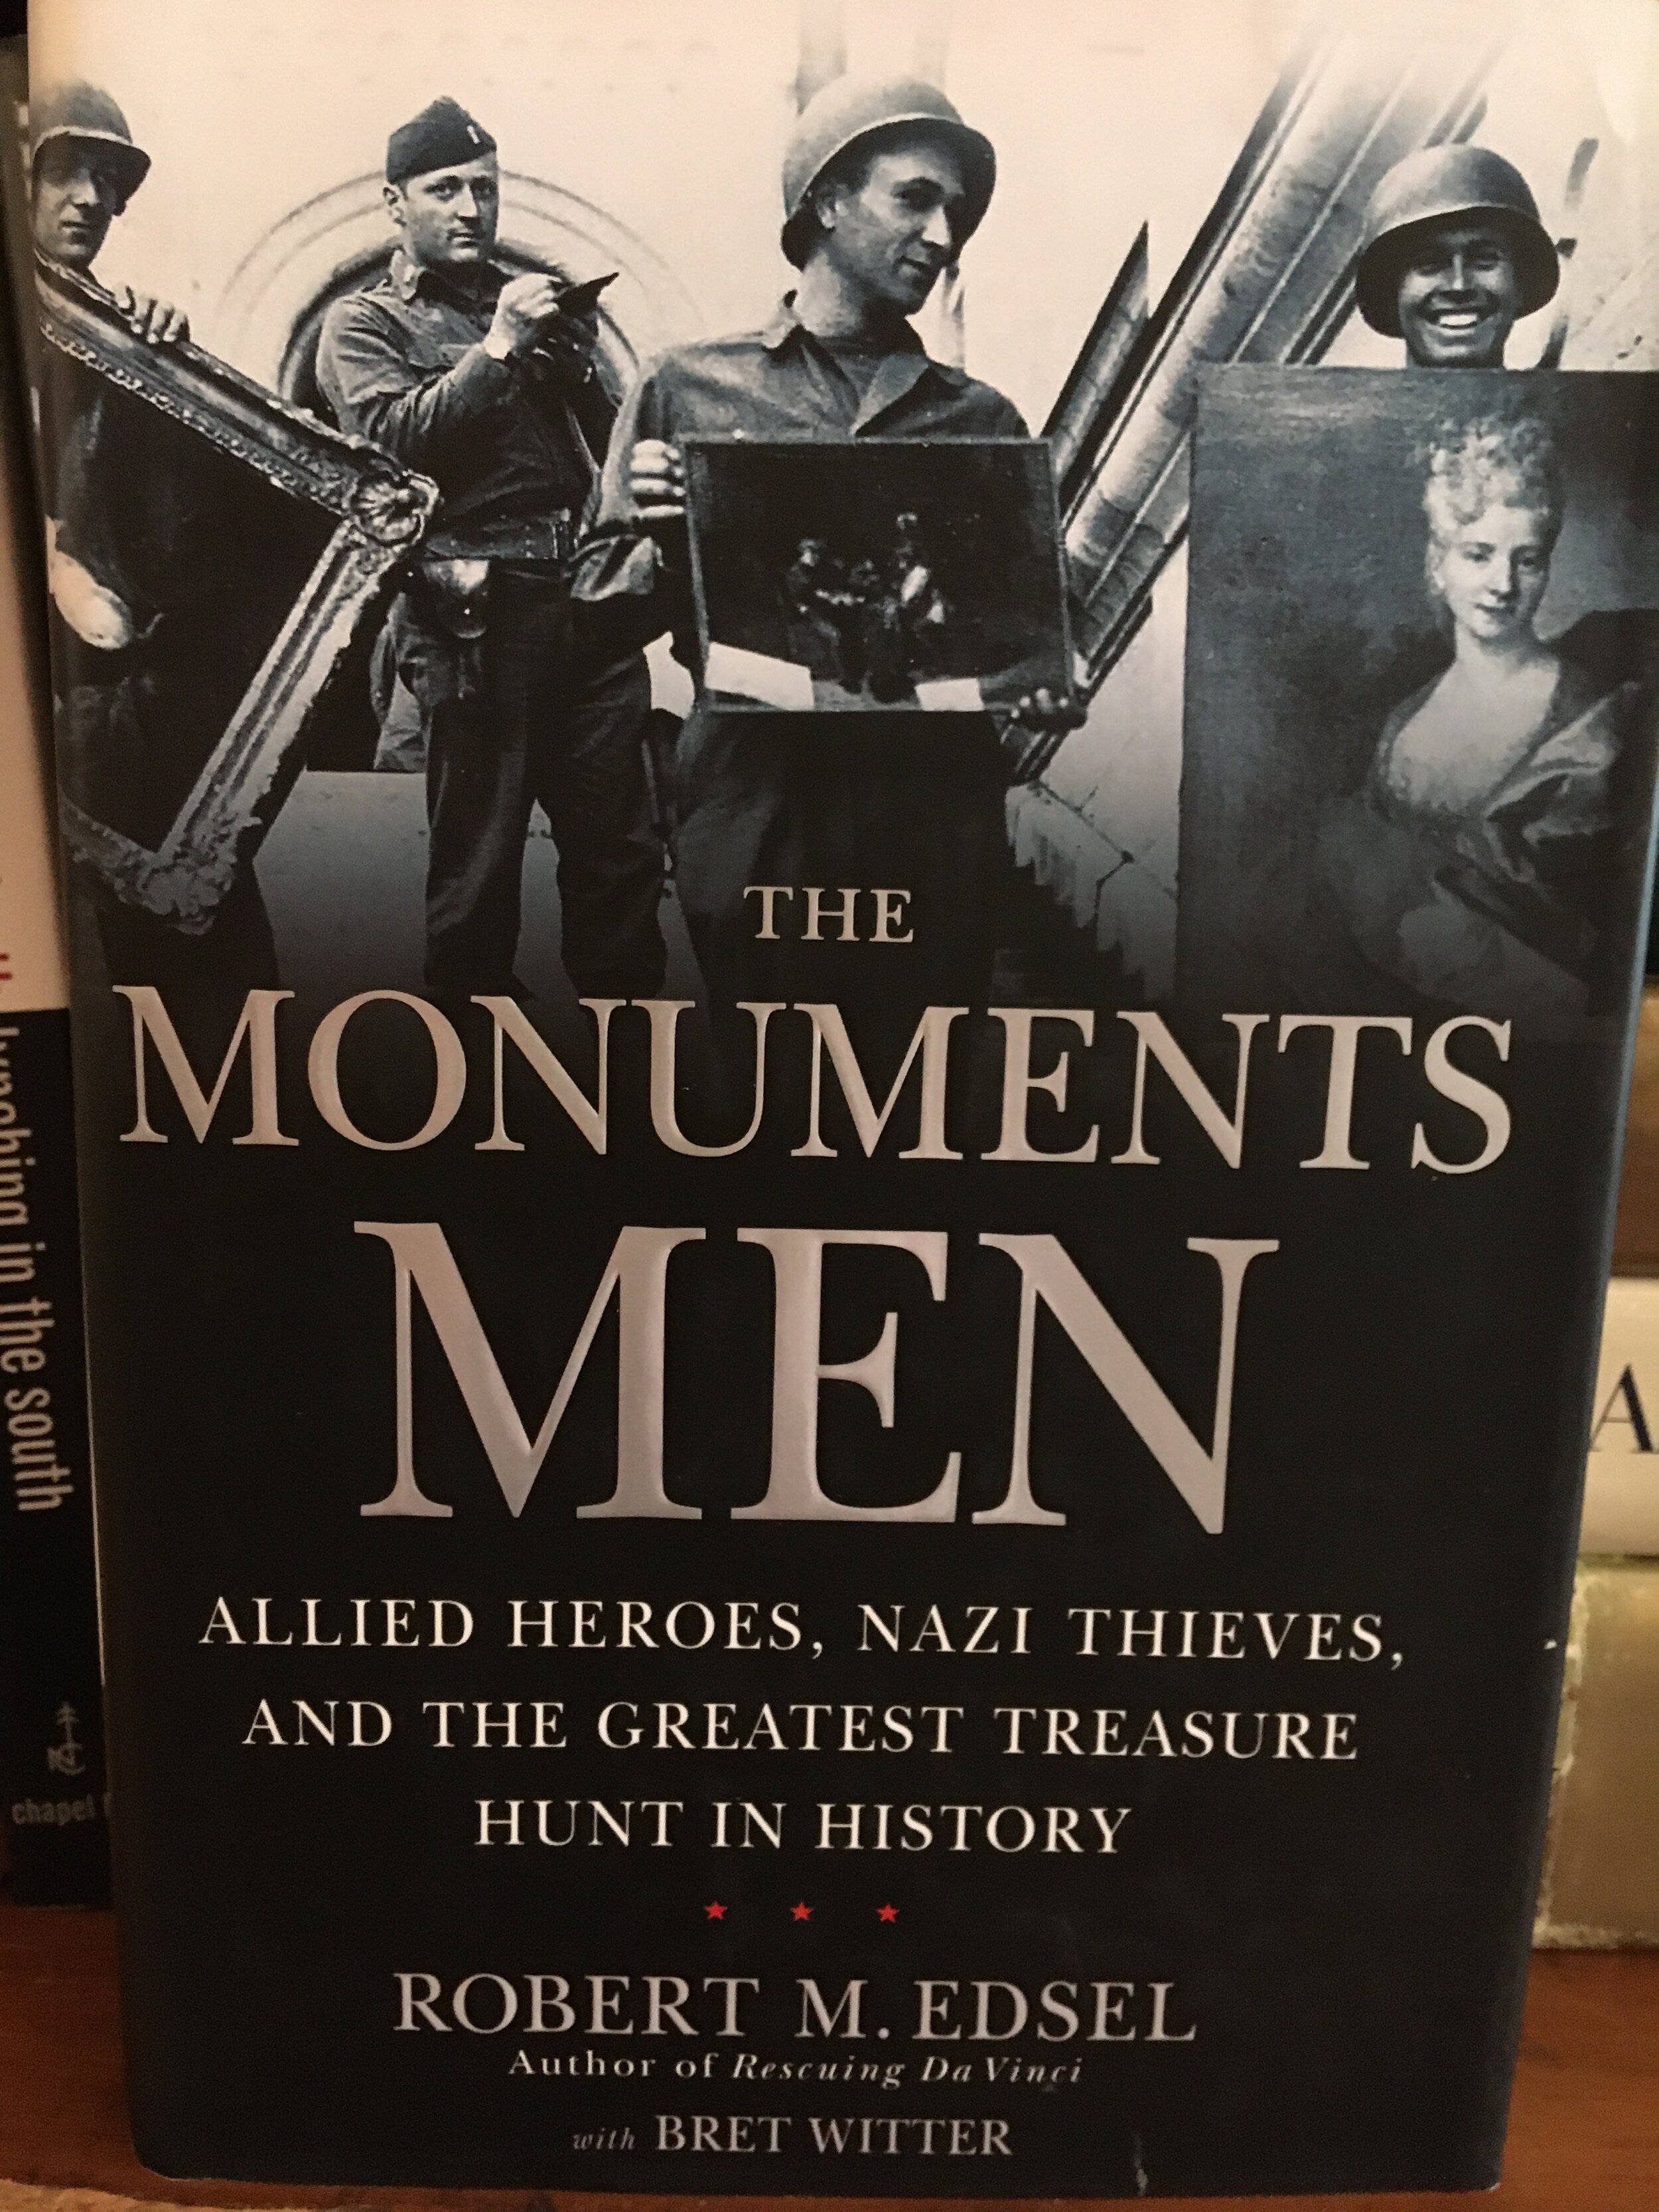 Legacy Used Books_The Monuments Men.JPG